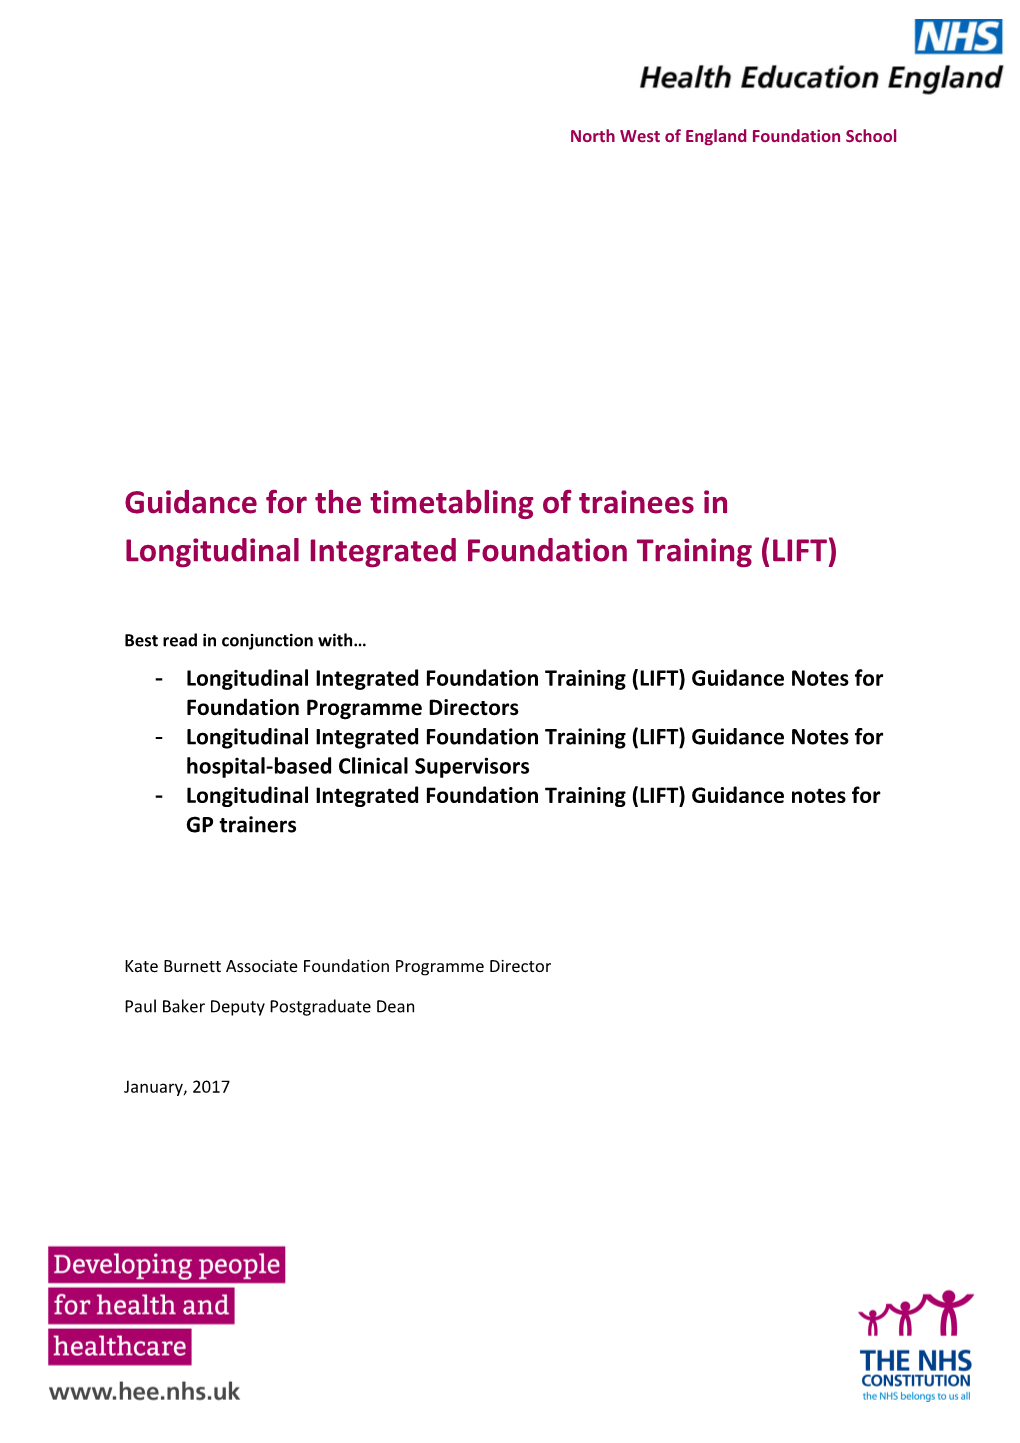 Guidance for the Timetabling Oftrainees in Longitudinal Integrated Foundation Training (LIFT)